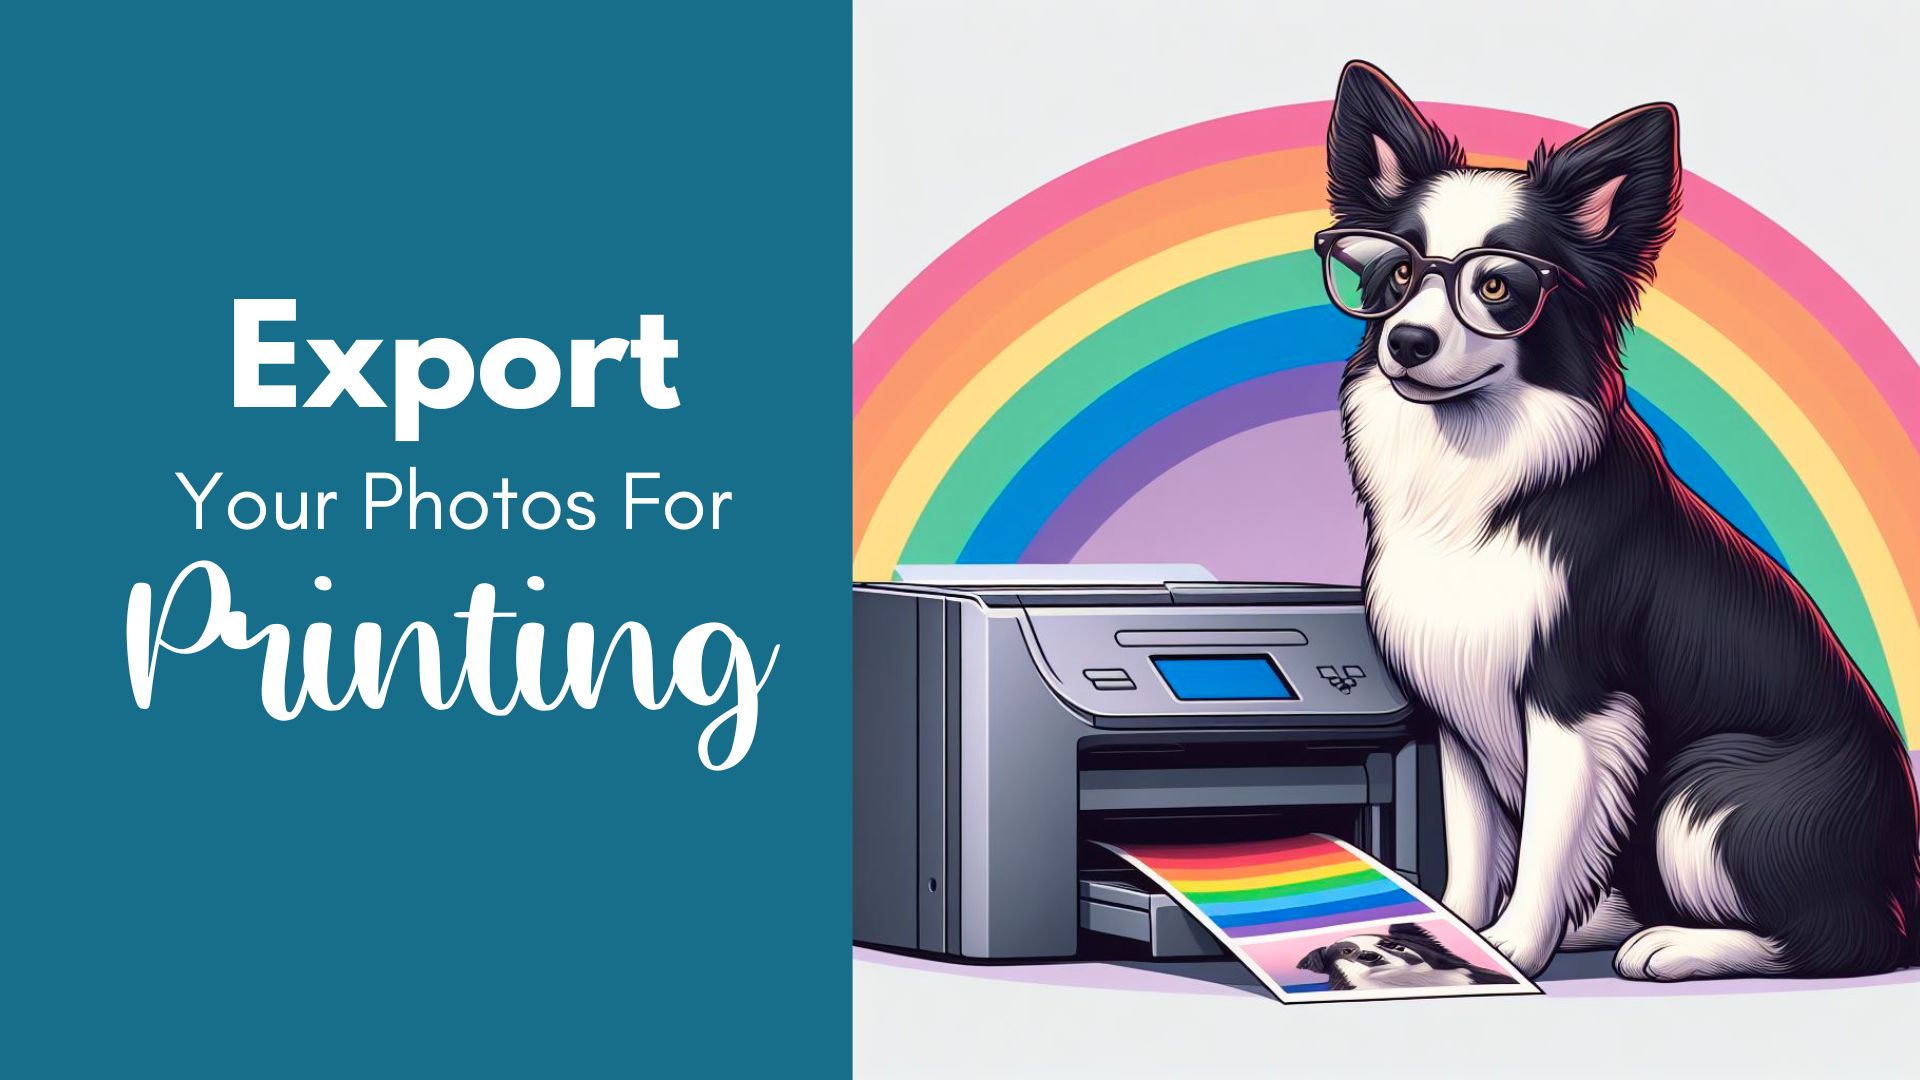 How to: Export Your Photo for Printing